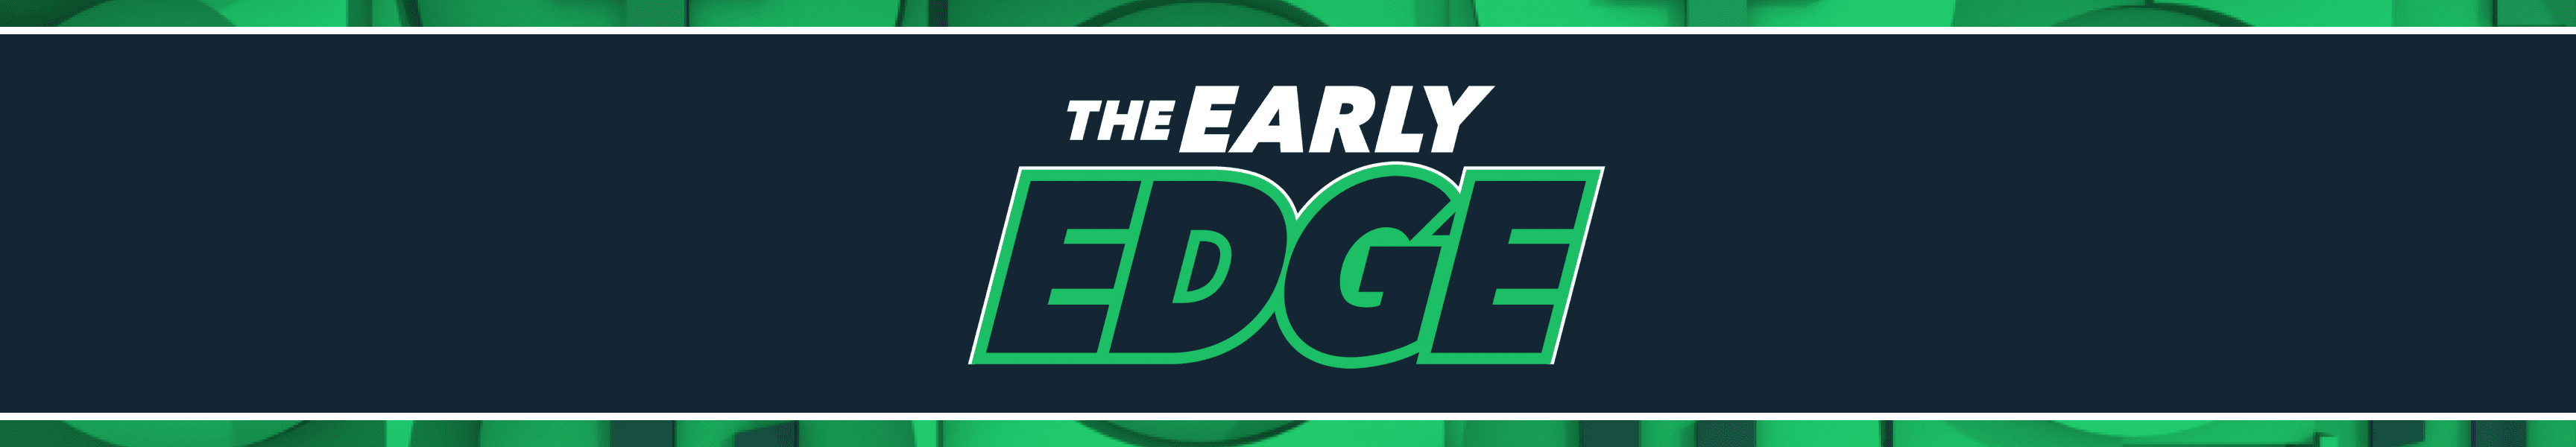 The Early Edge